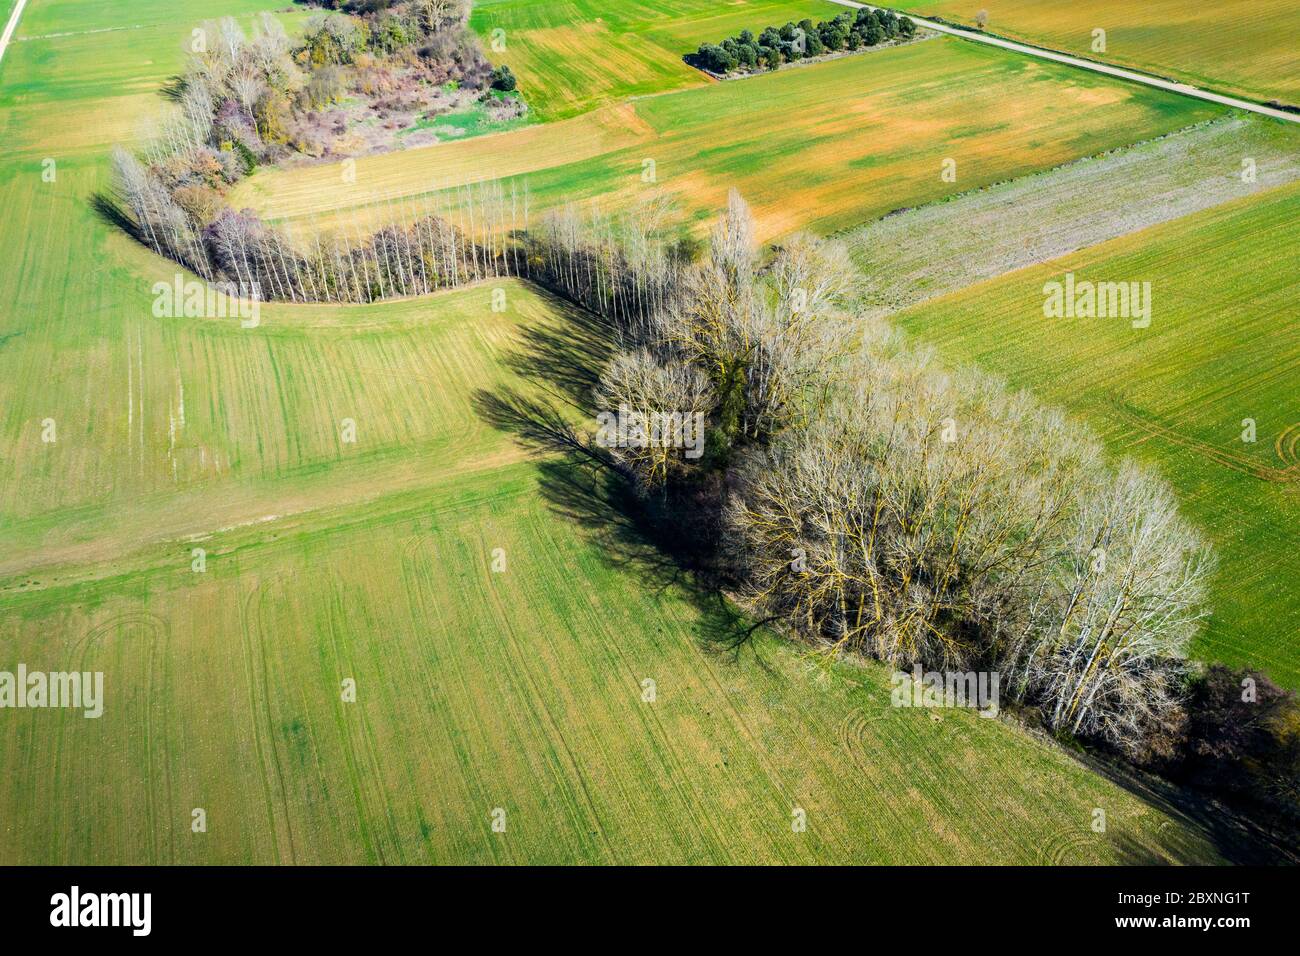 Cereal farm in a plain and riverbed with poplar trees. Stock Photo